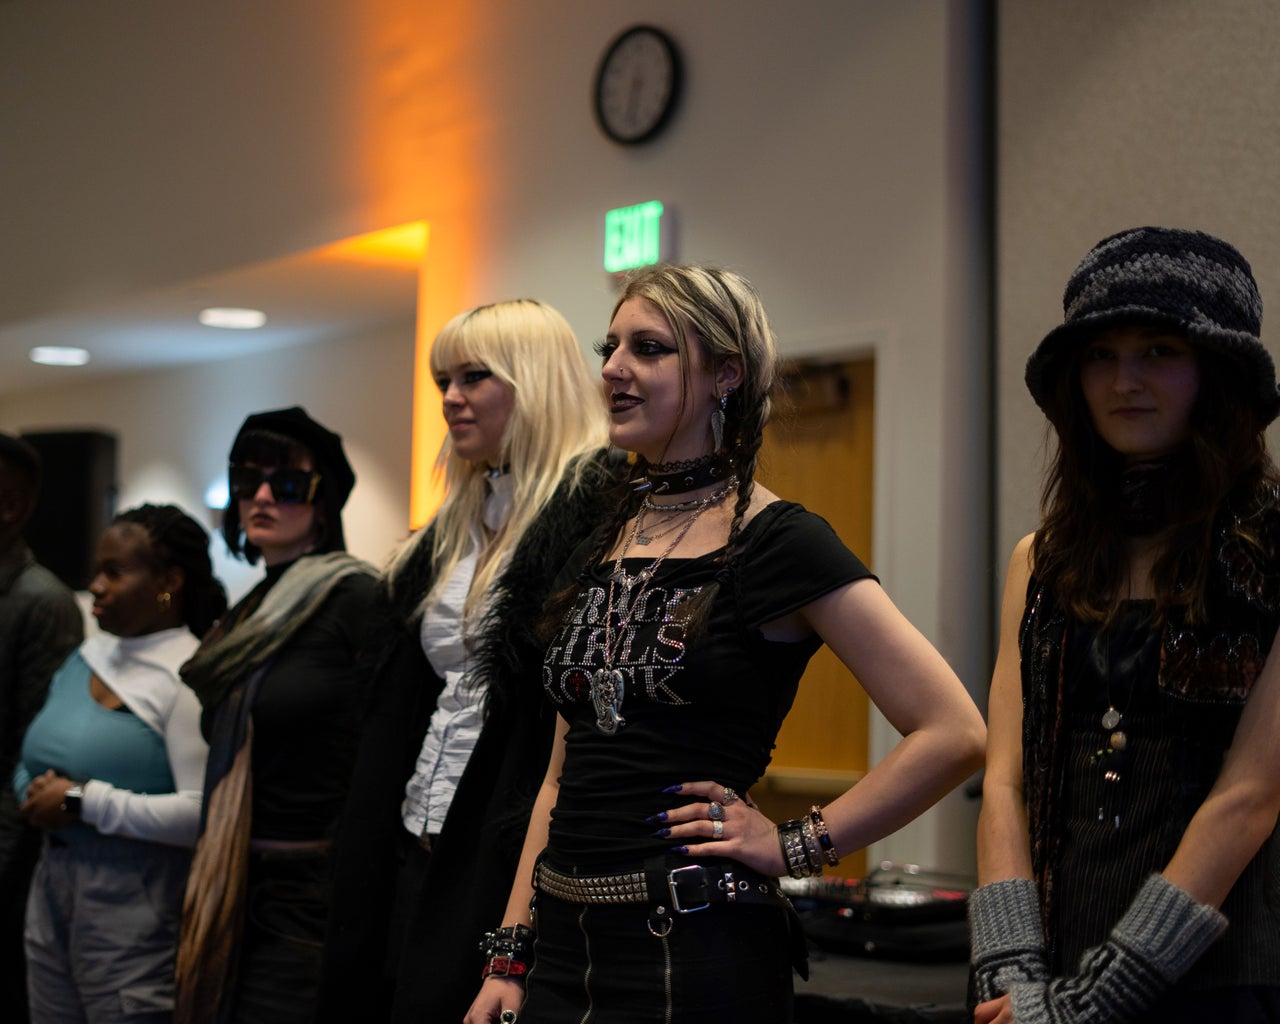 Women in dark clothing lined up at a fashion show